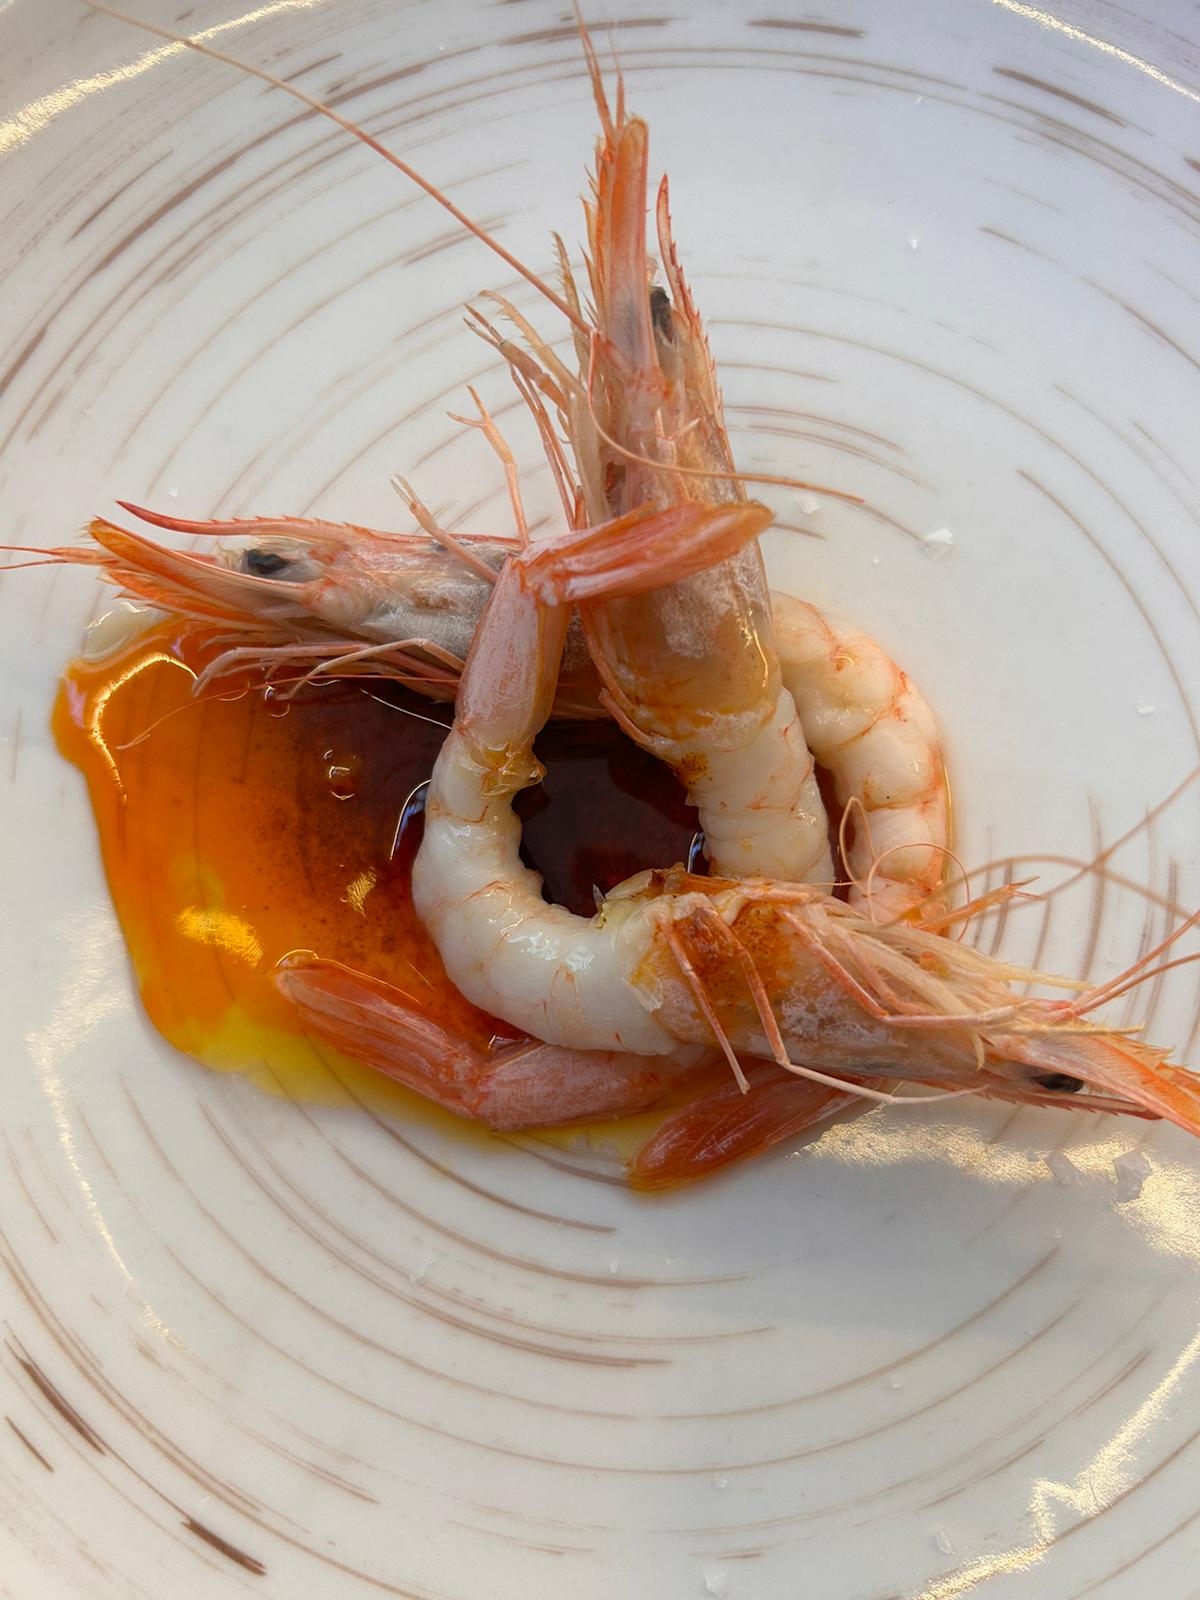 Grilled White Prawn from Malaga with its Pil - PiL